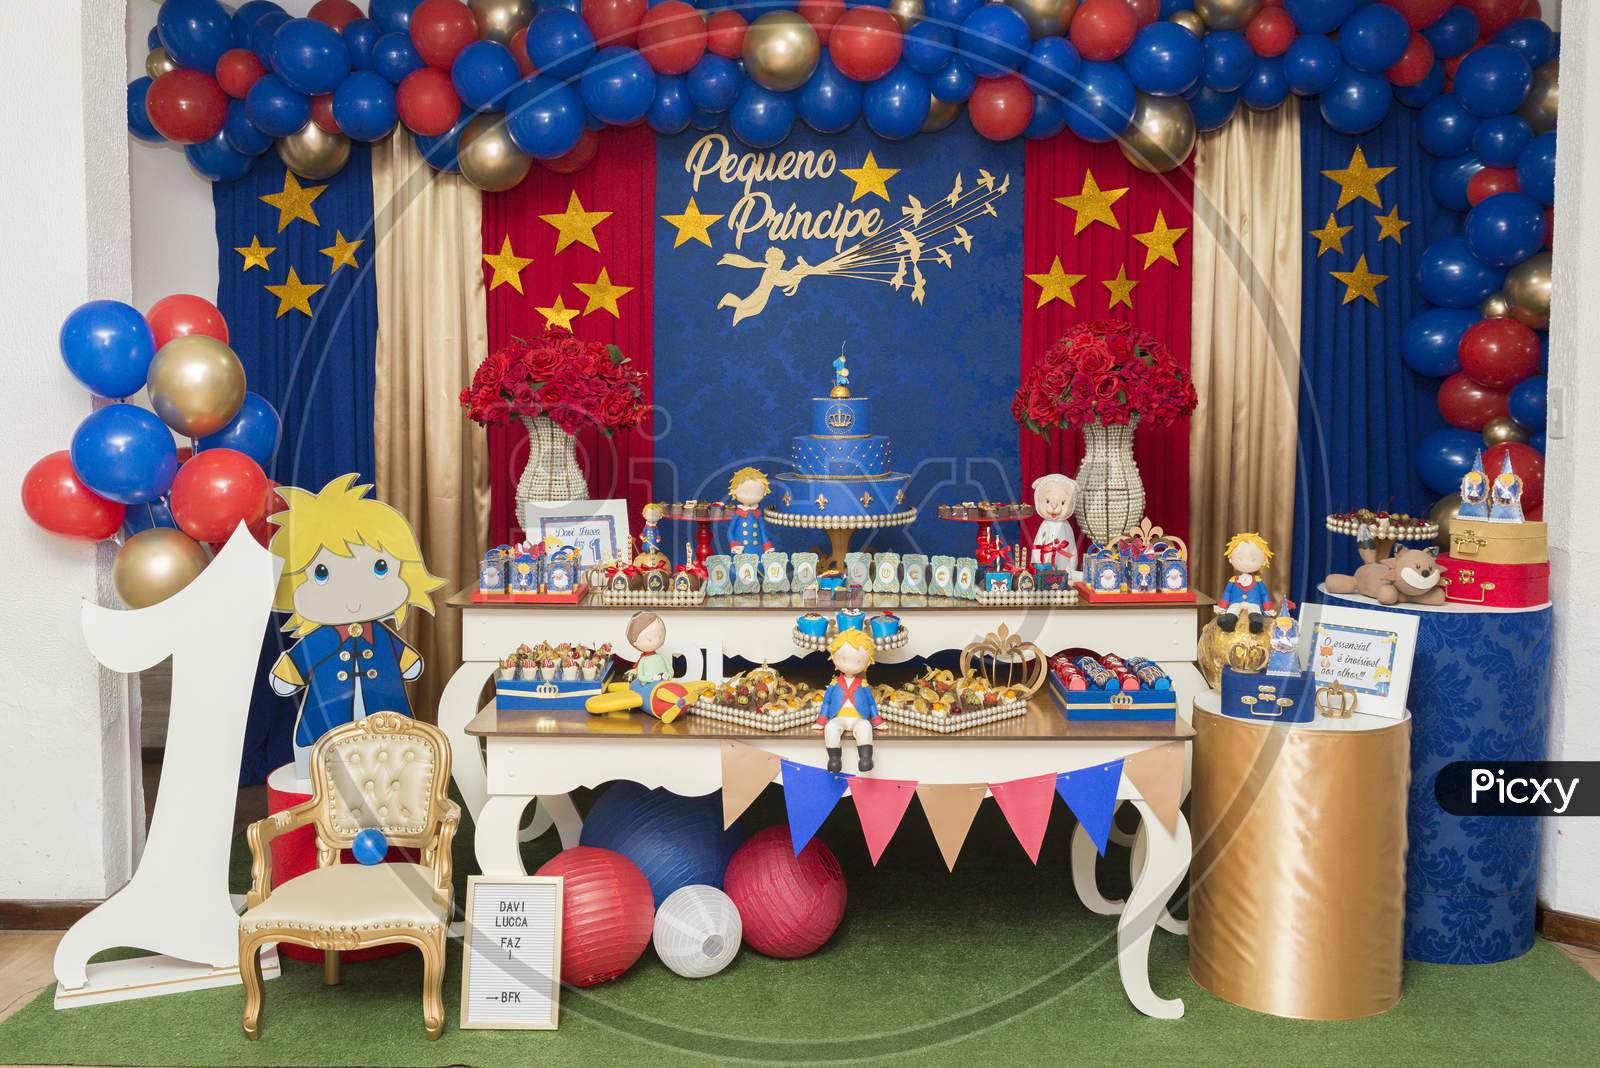 Little Prince Theme Party. Decorated Table For Child Birthday Celebration.